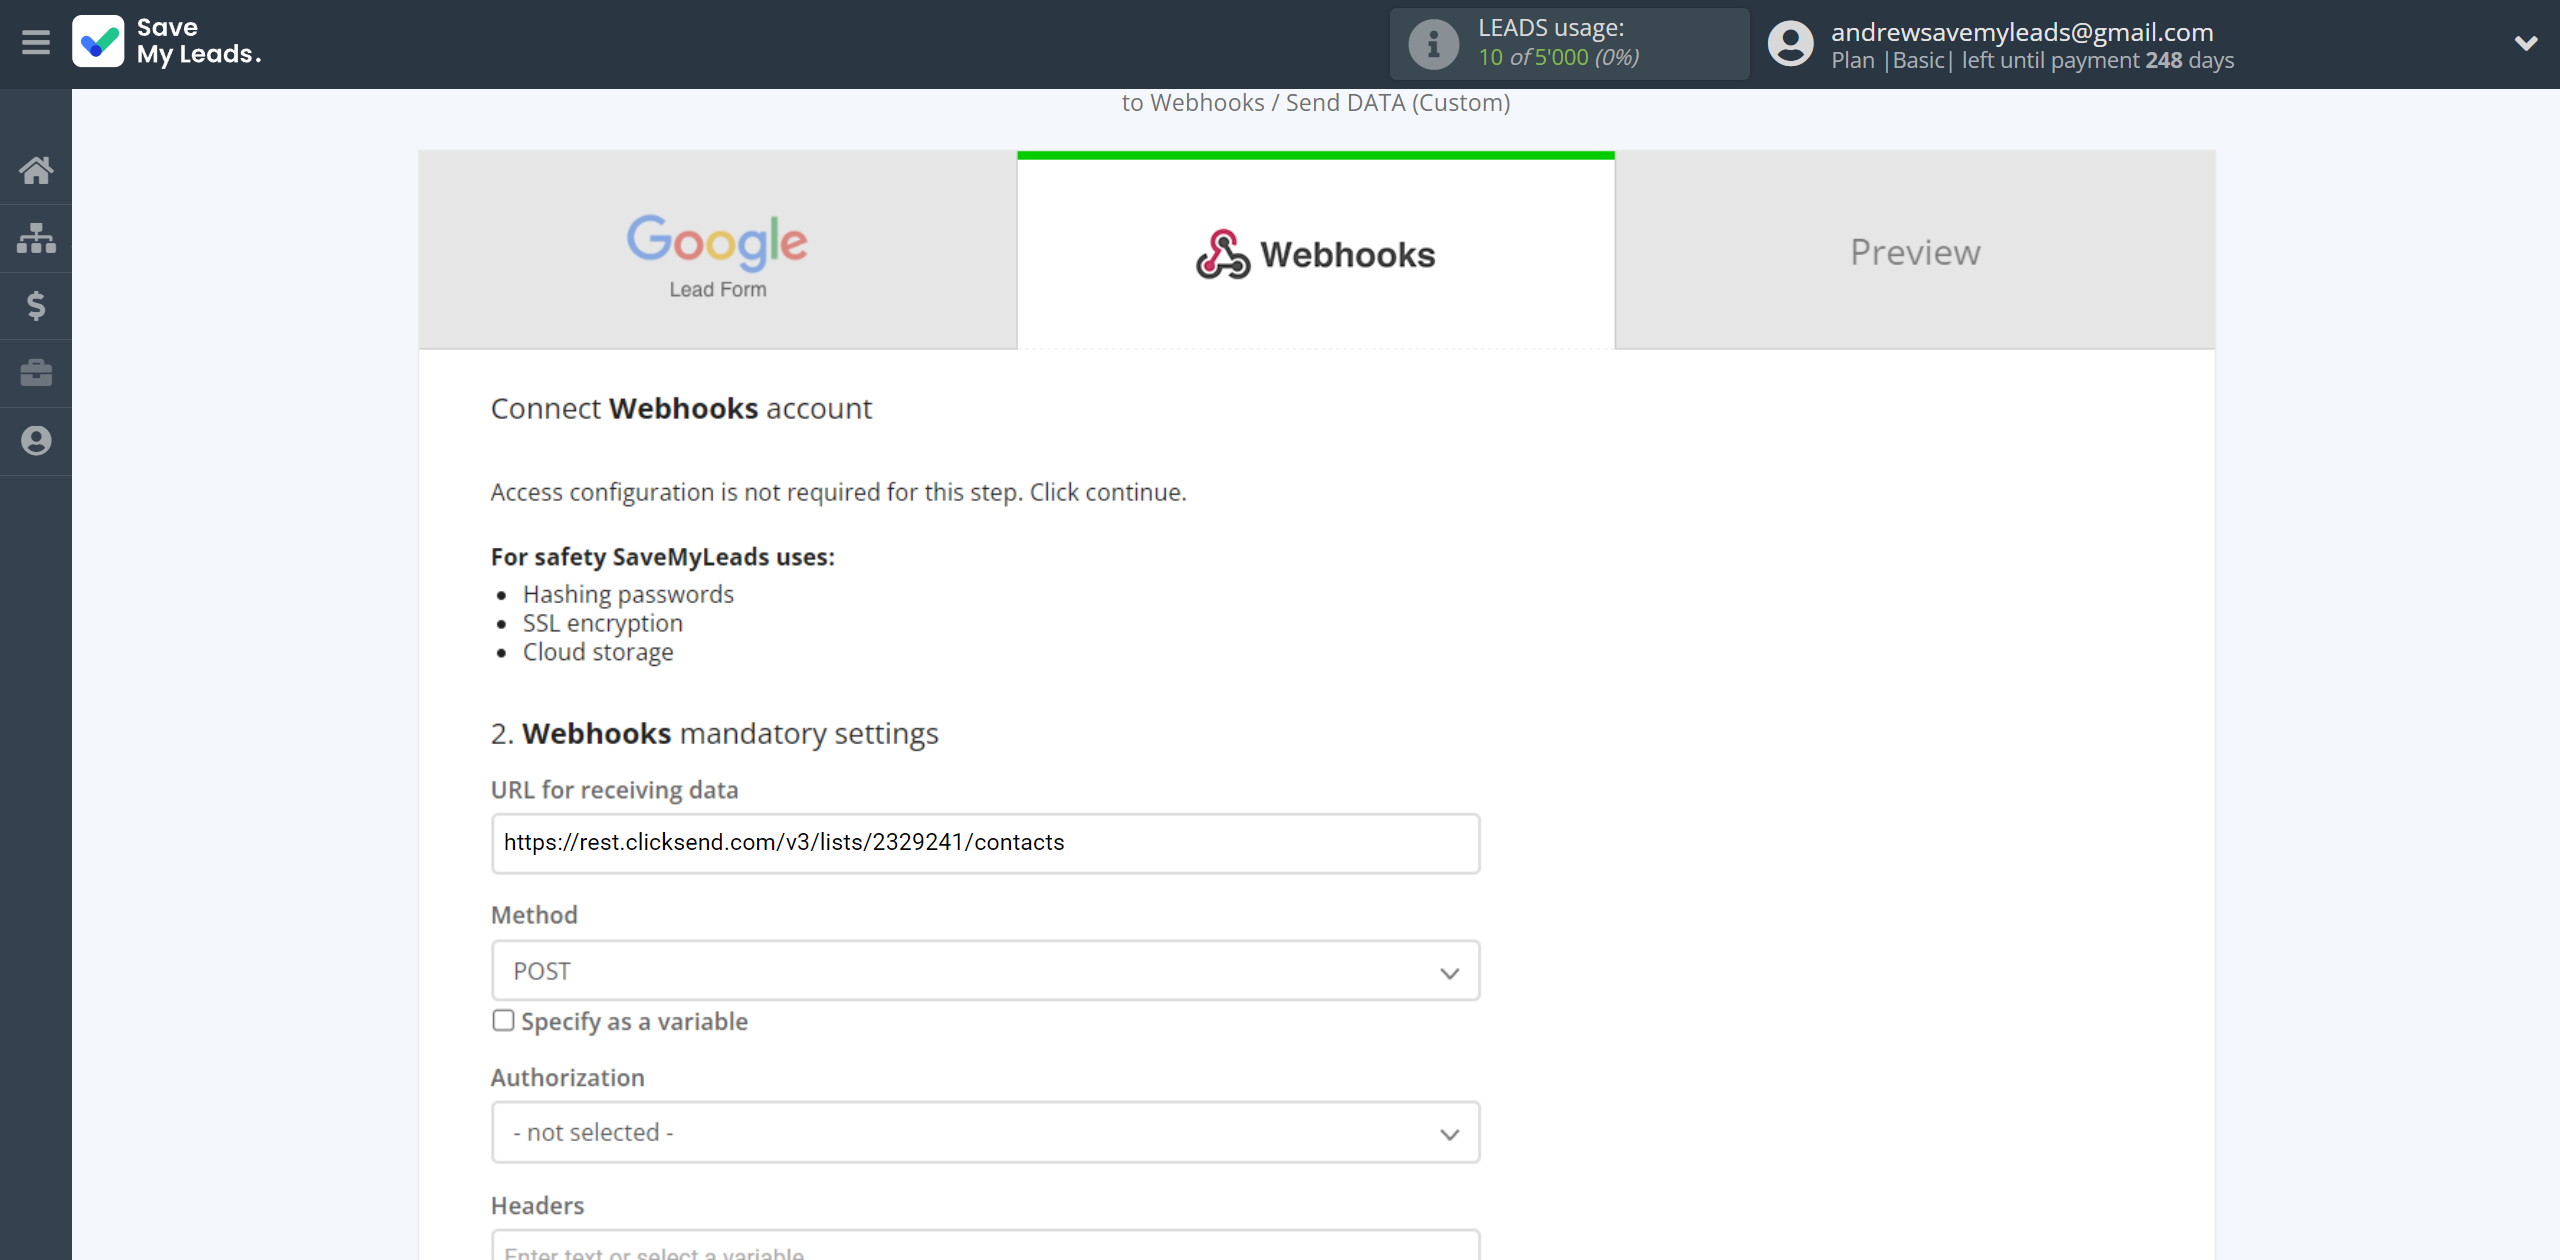 How to Connect Google Lead Form with Webhooks (Custom) | Editing settings